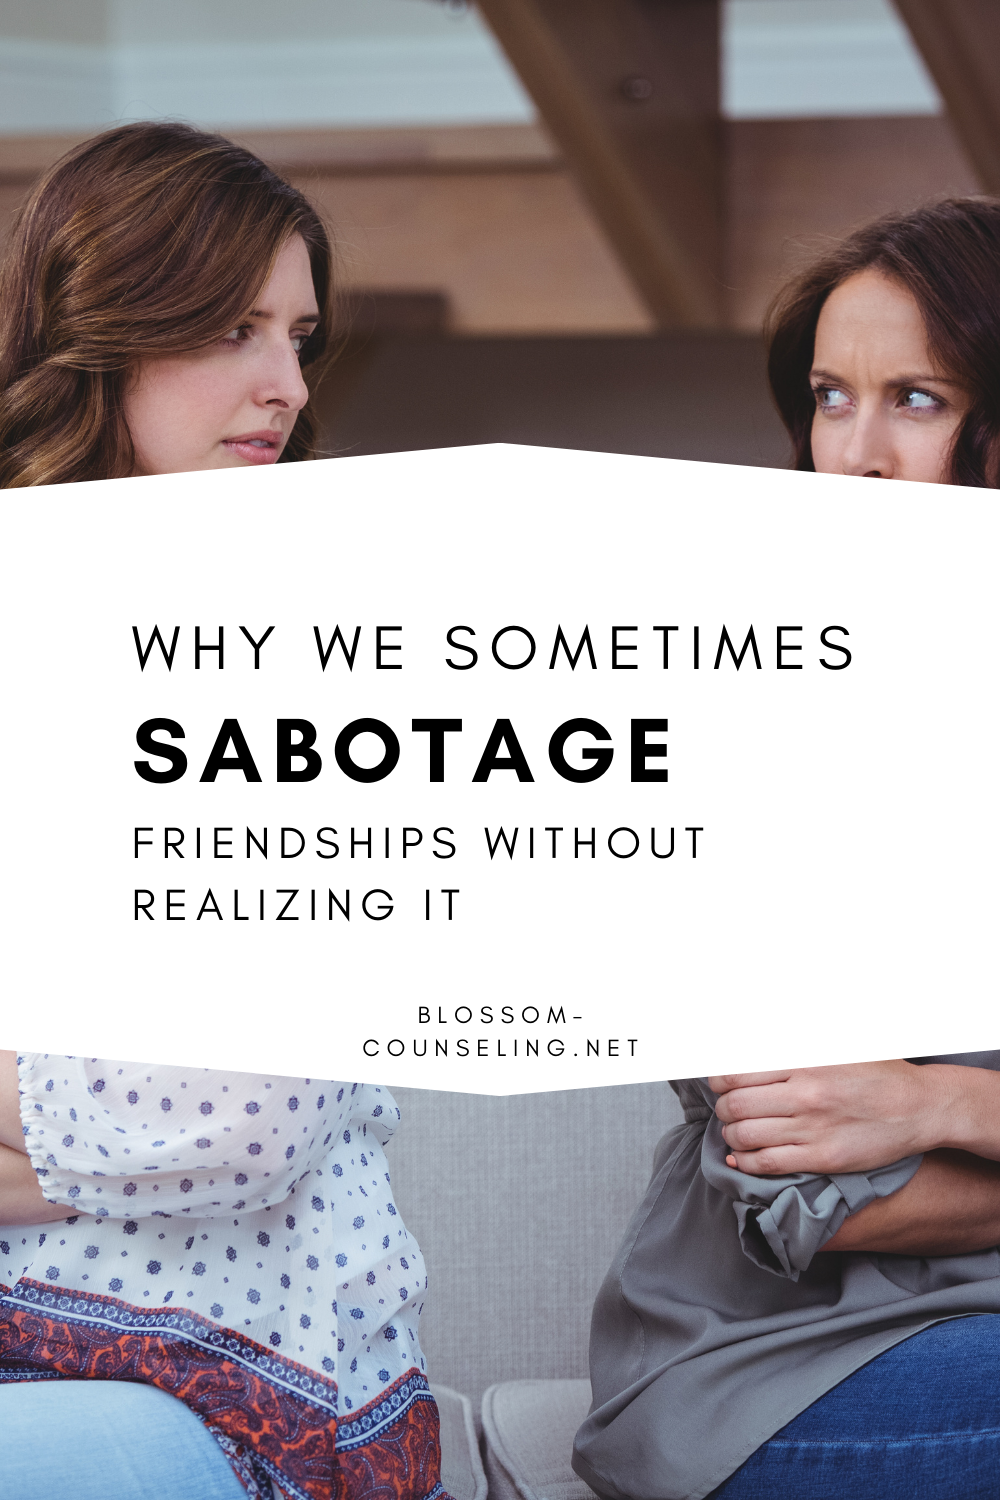 Why We Sometimes Sabotage Friendships Without Realizing It